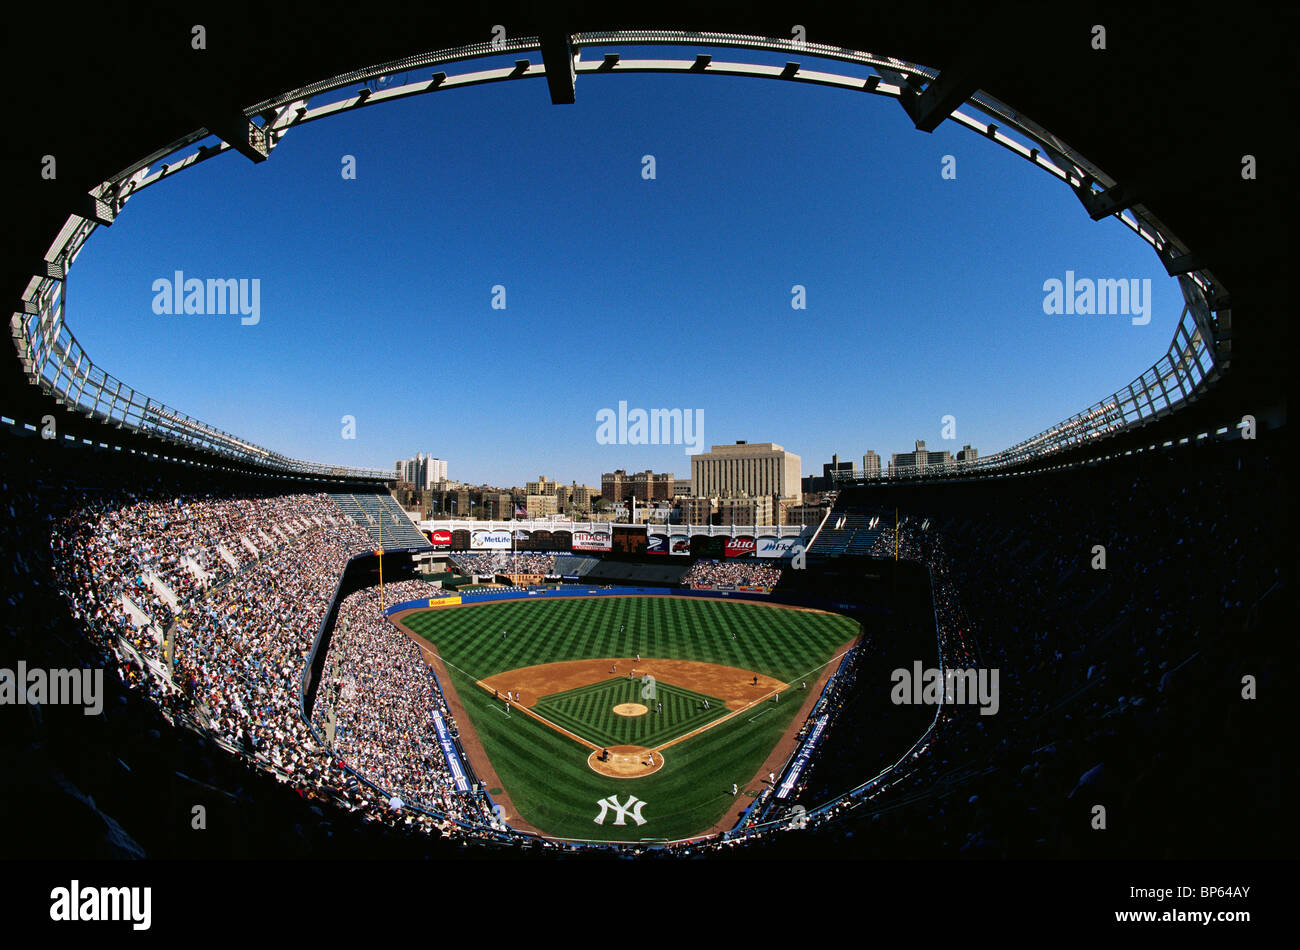 An overview of Old Yankee Stadium during a major league baseball game between the New York Yankees and the Detroit Tigers. Stock Photo